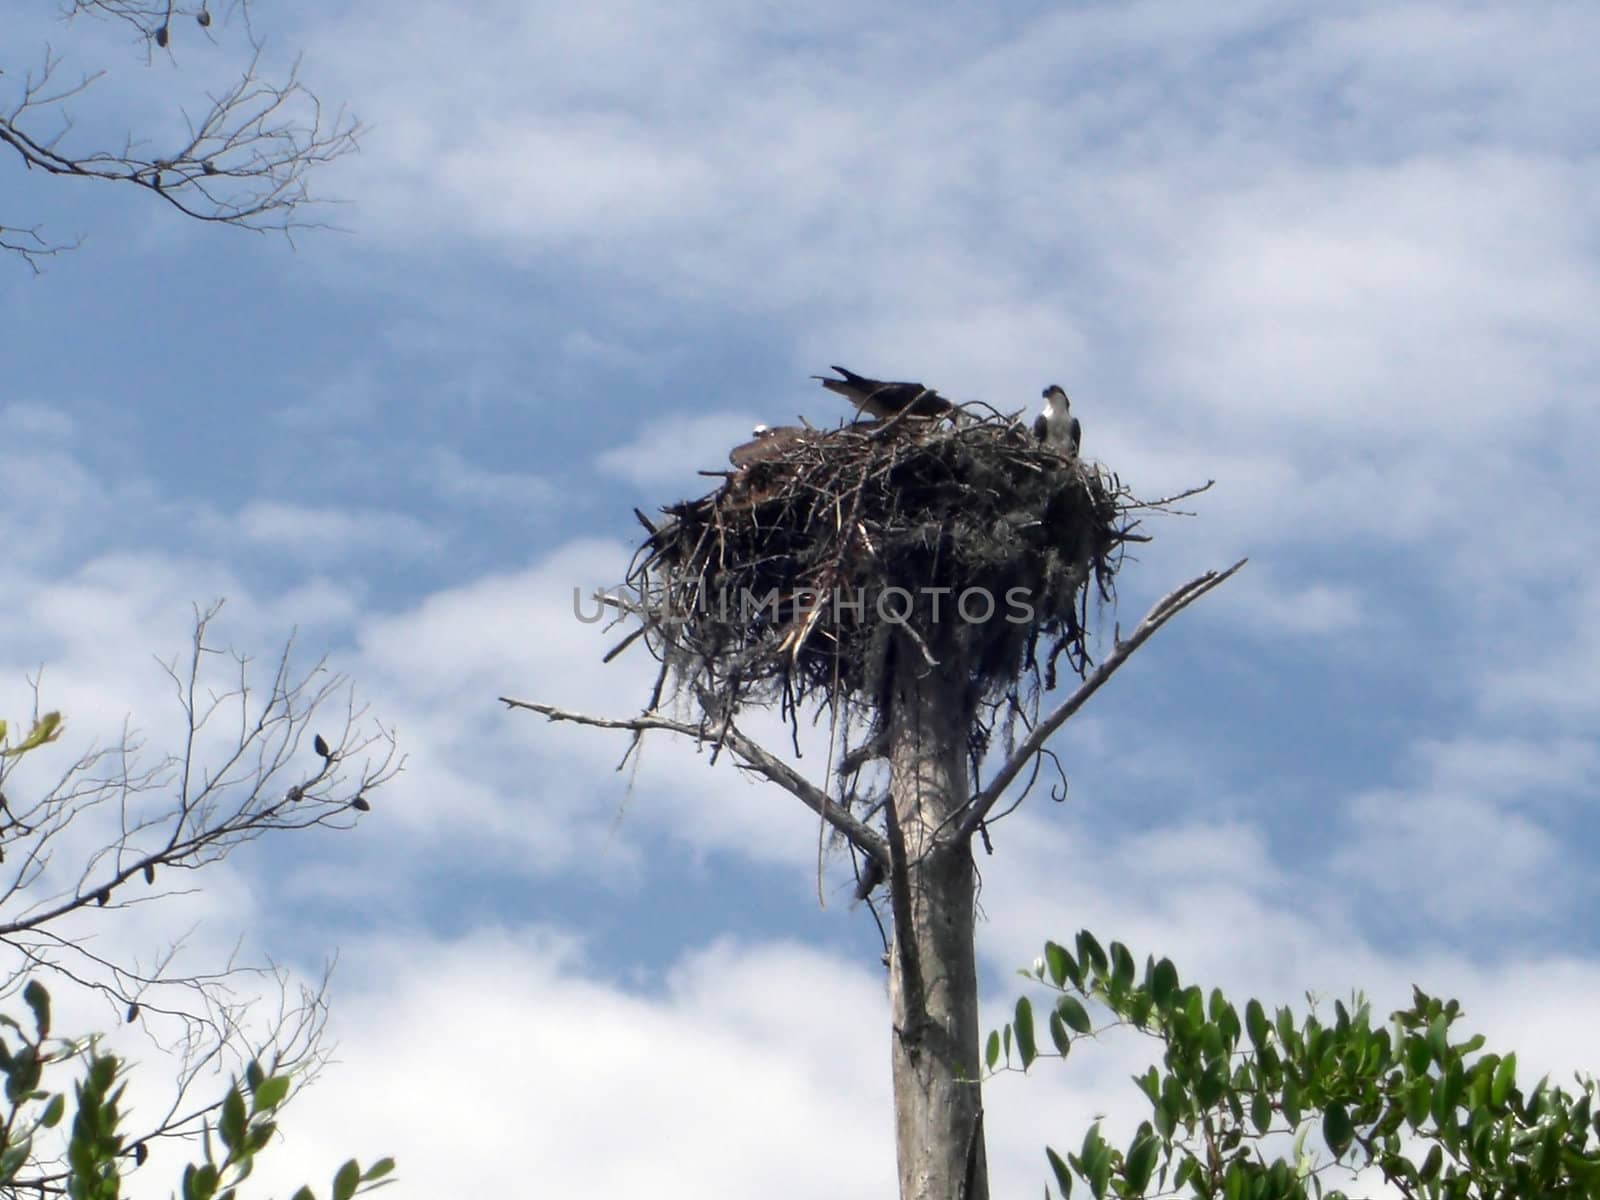 An eagles nest with eagles in it, is firmly sitting on top of a high standing tree